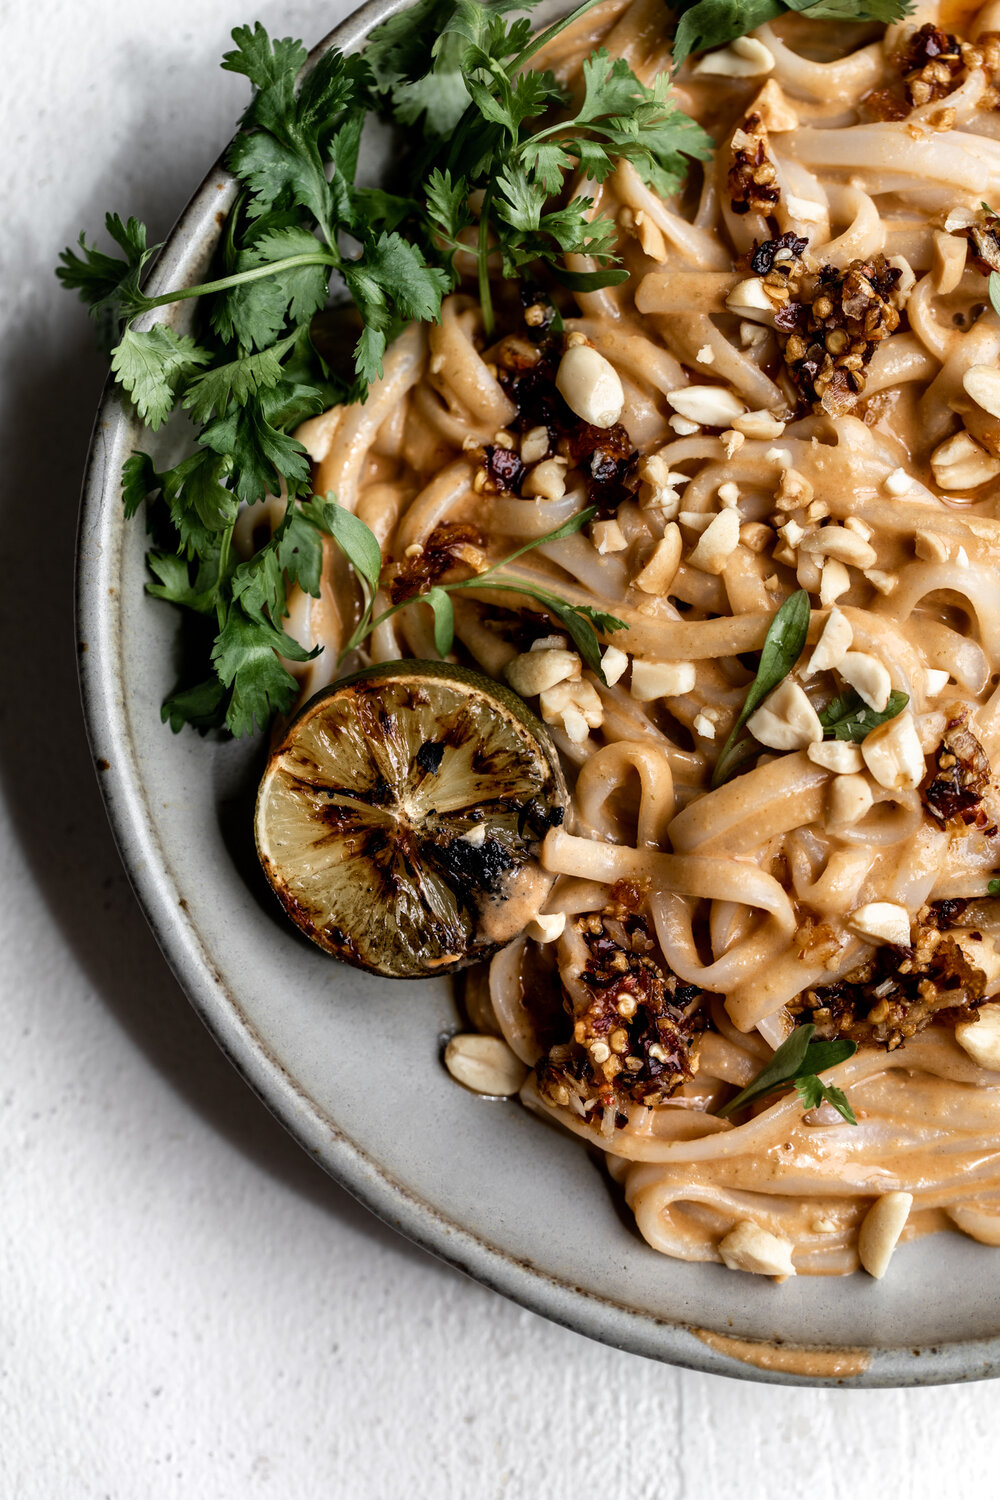 Peanut Noodles with Charred Limes with chili crunch